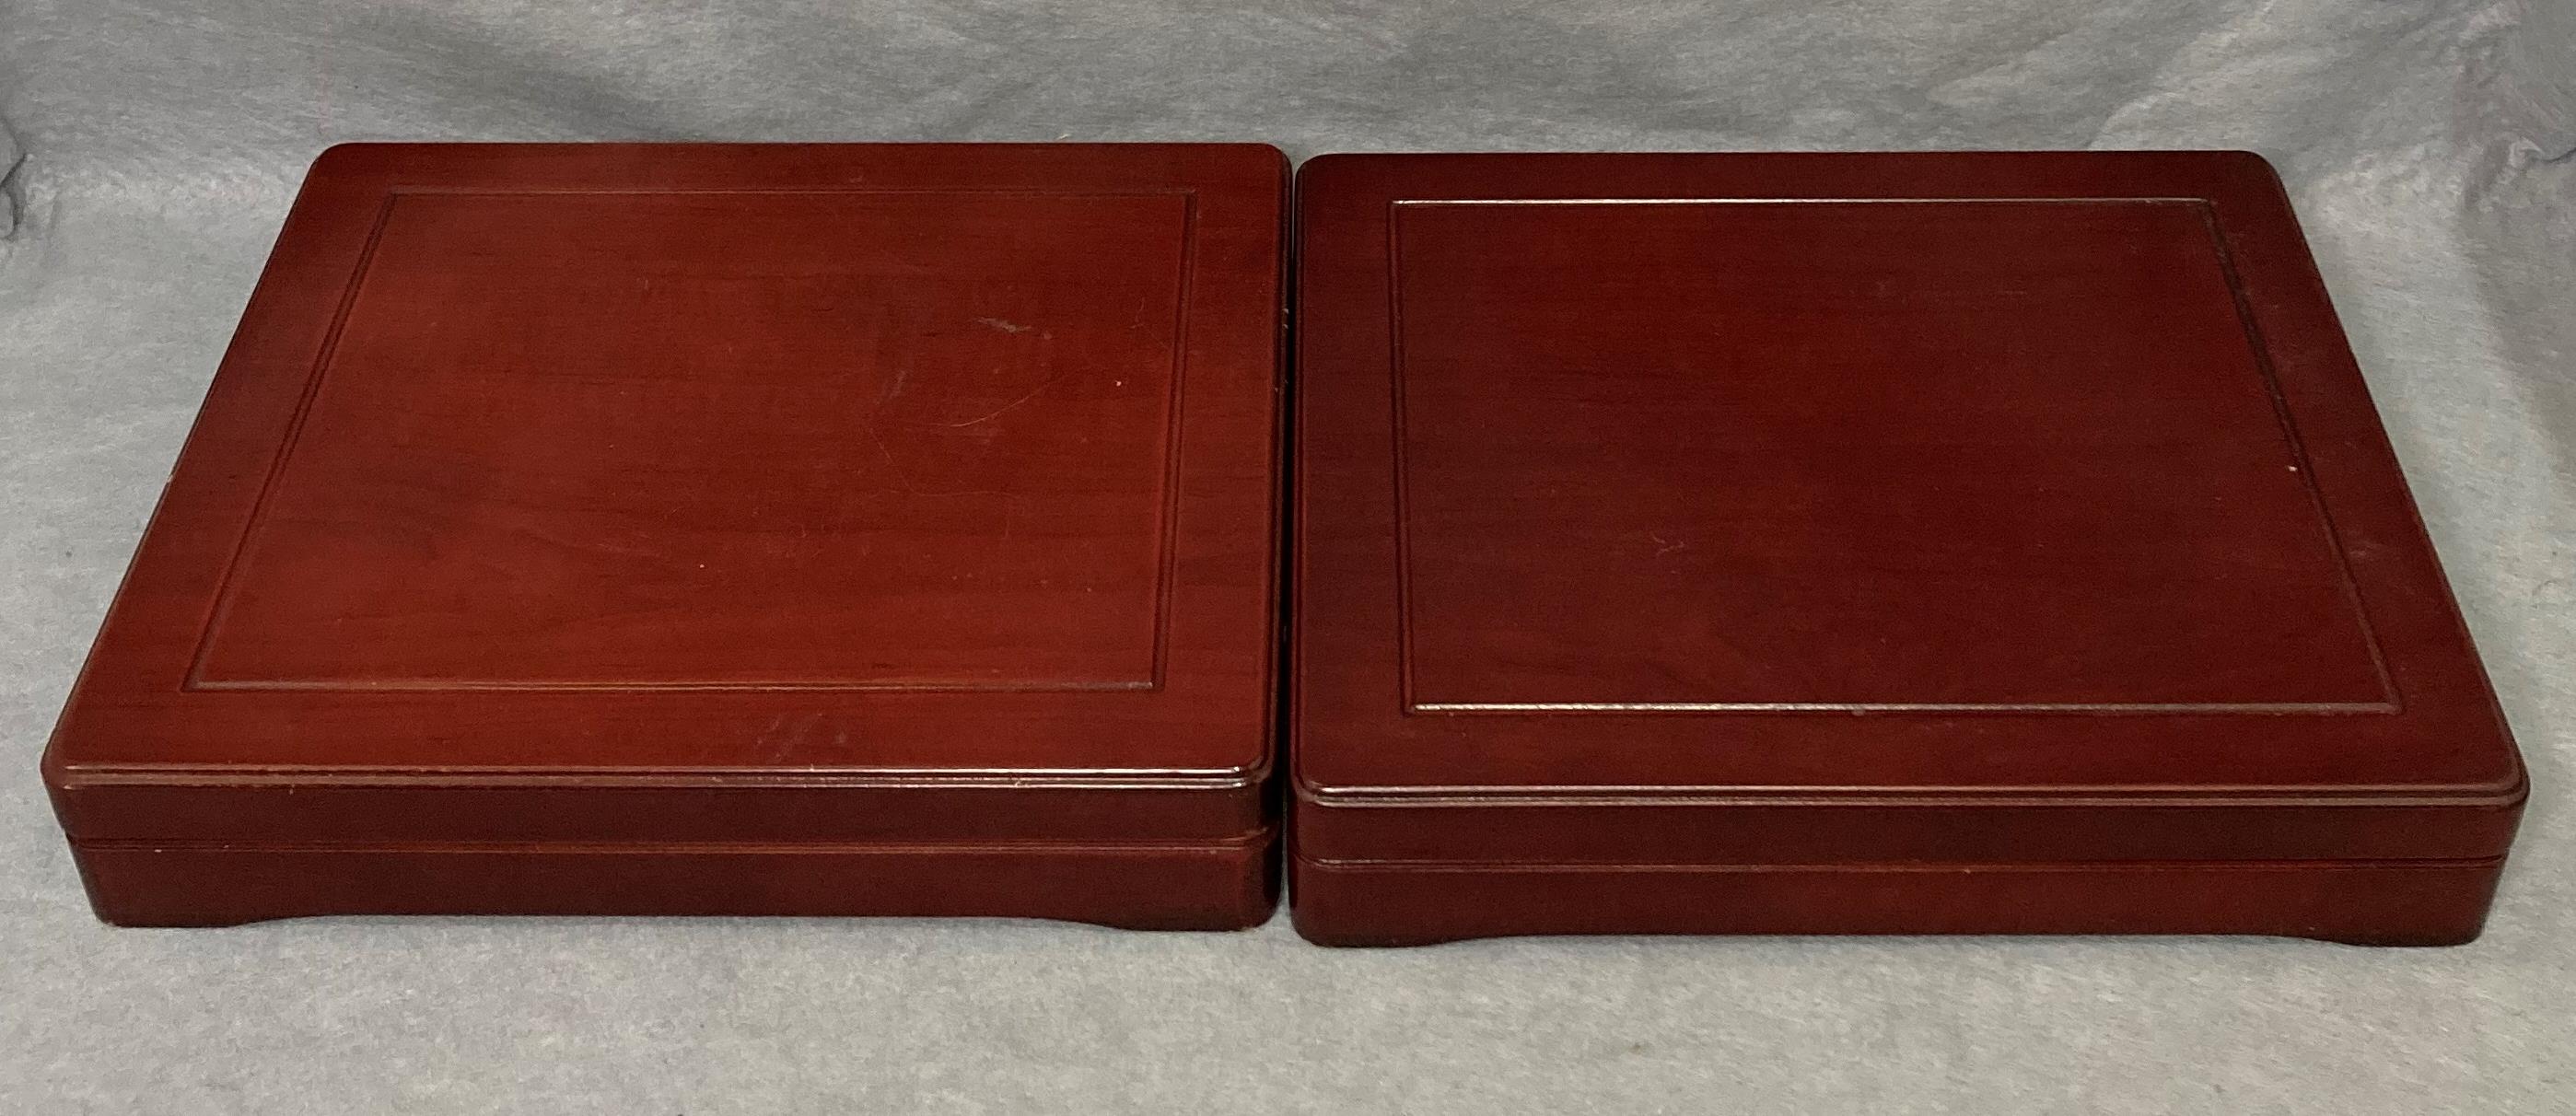 Contents to two fitted coin cases - twenty-six assorted commemorative coins some in silver and gold - Image 4 of 4